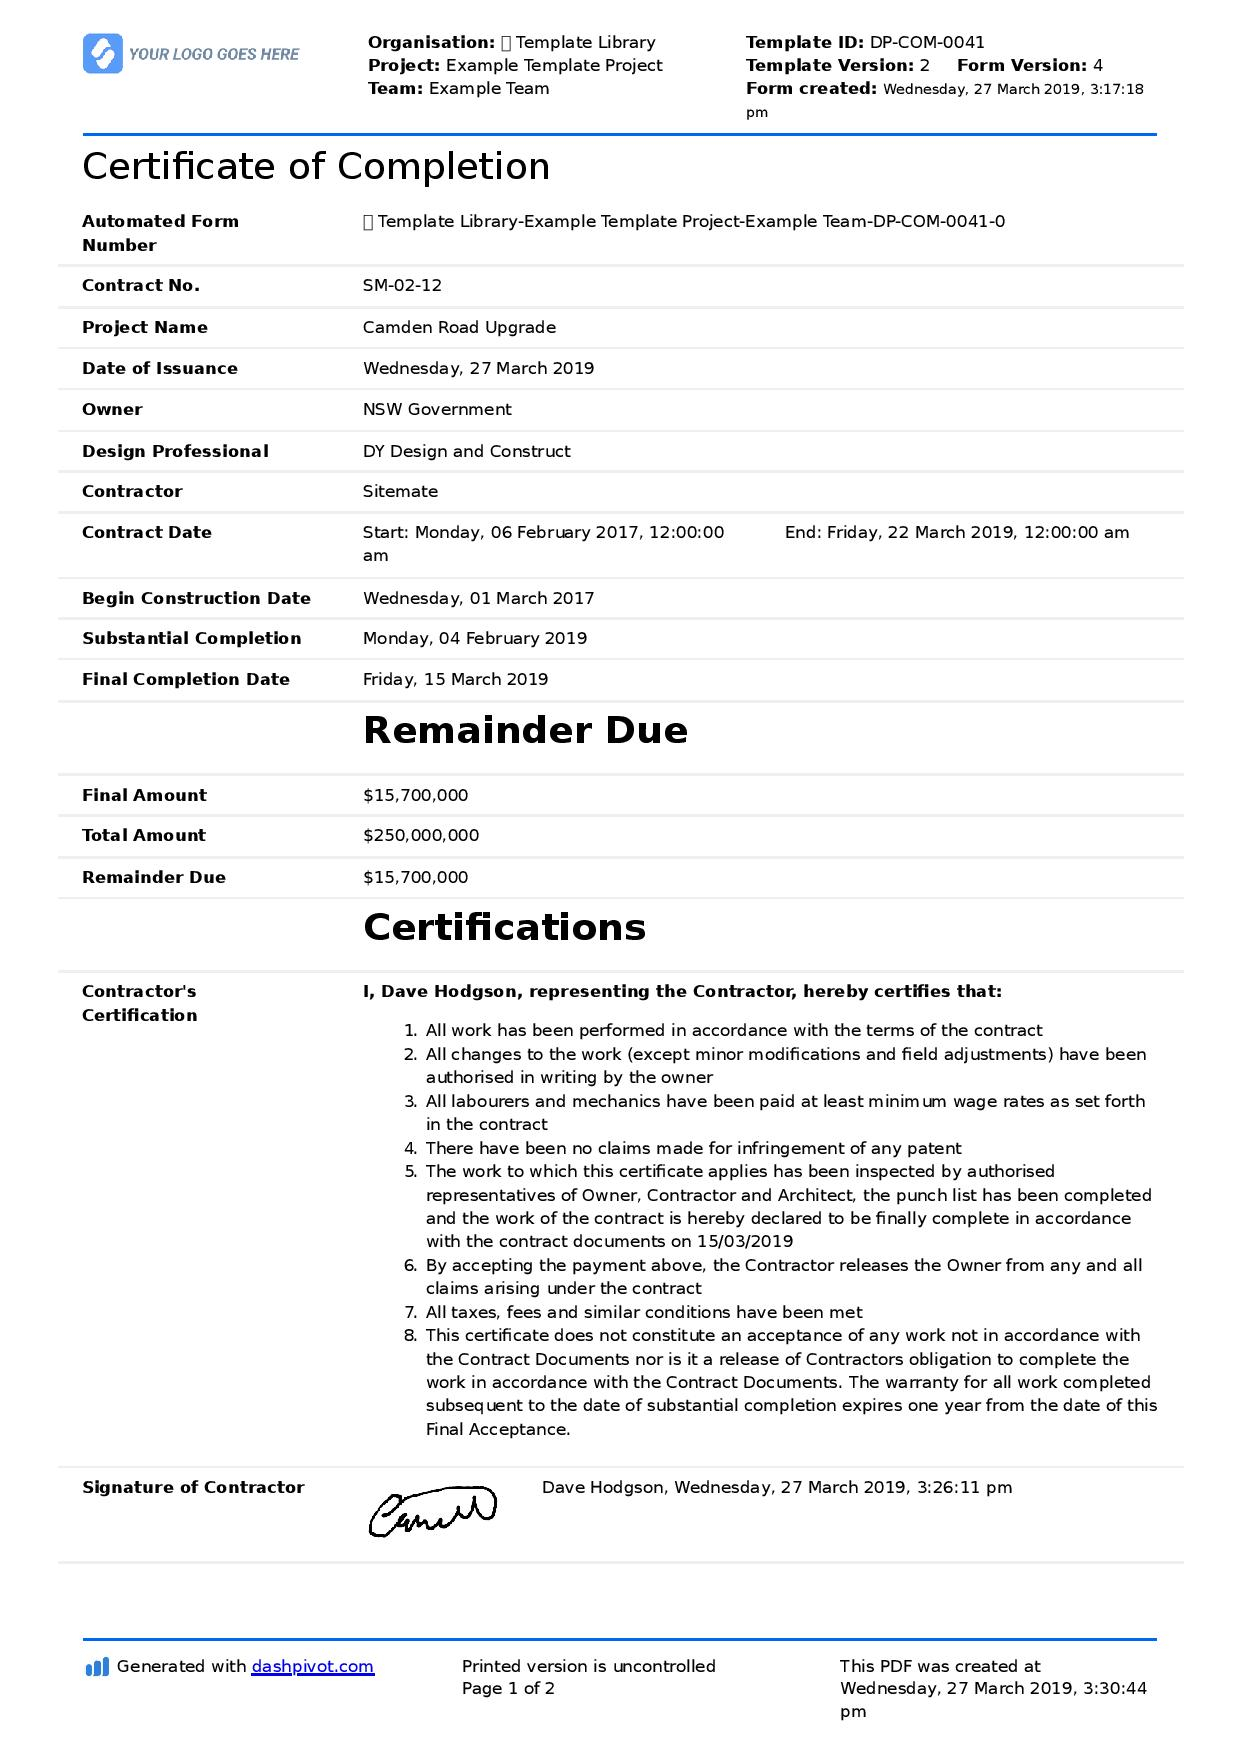 Certificate Of Completion For Construction (Free Template + Sample) With Construction Payment Certificate Template